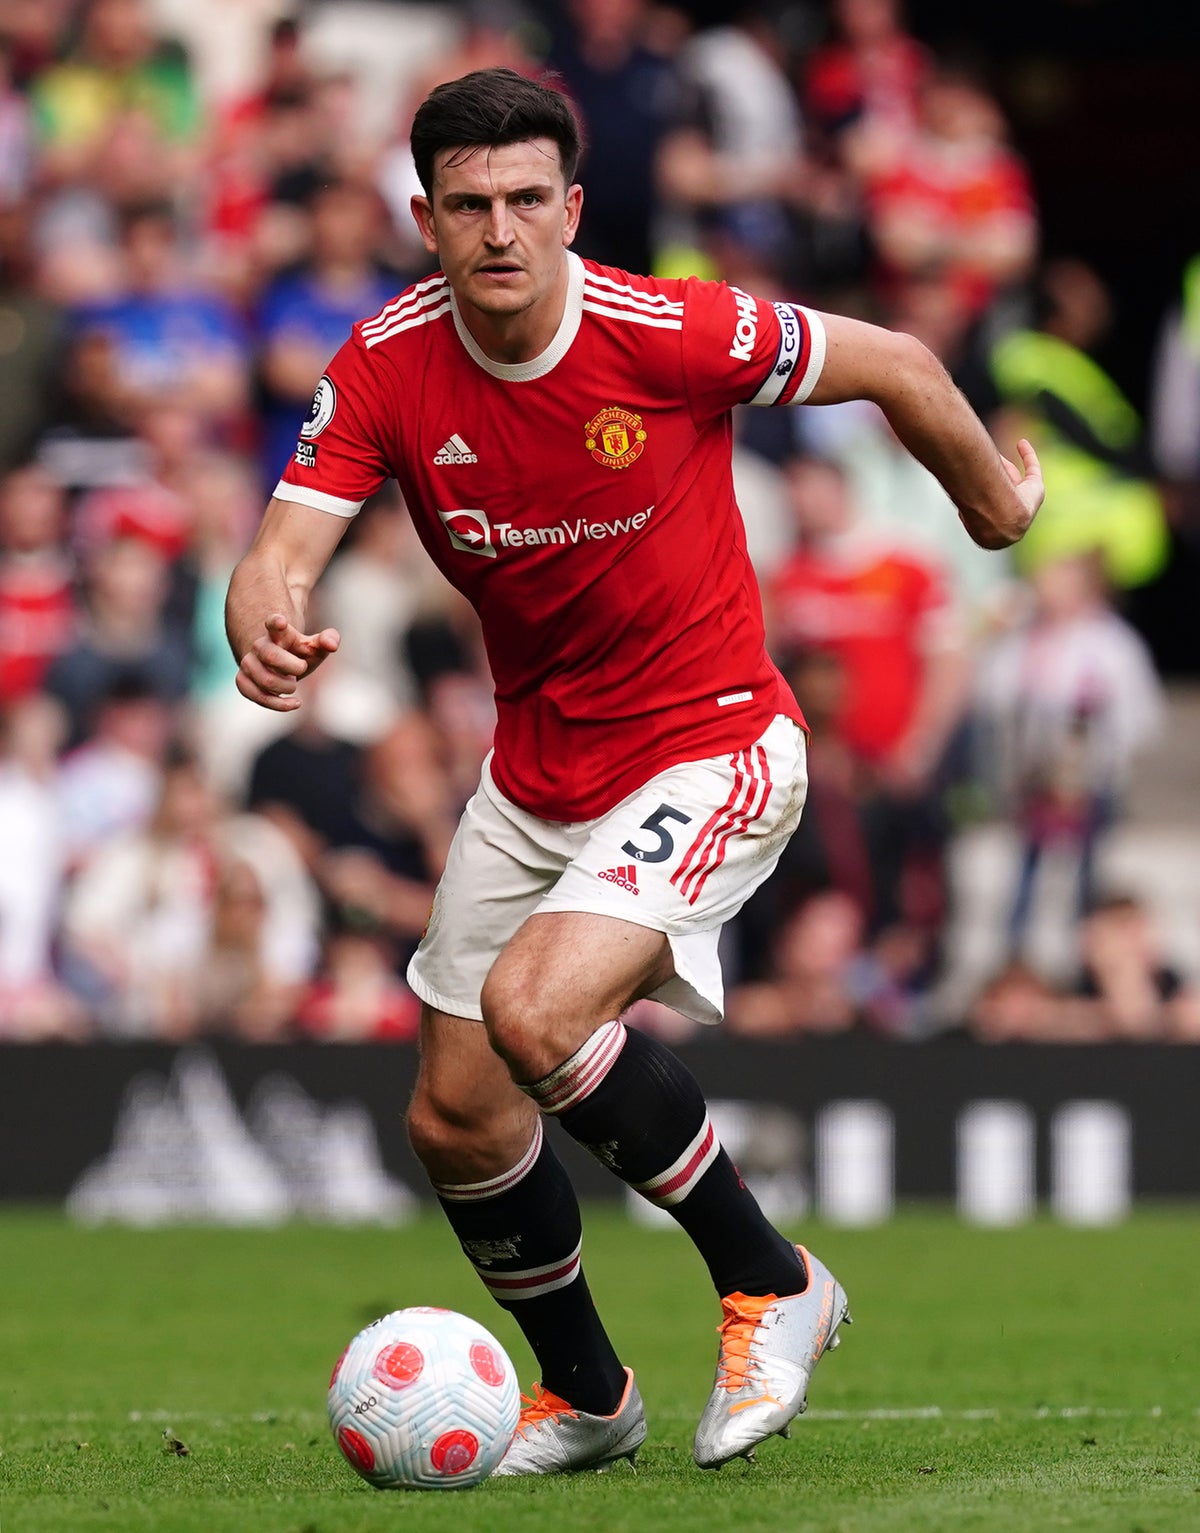 Harry Maguire eager to put disappointing season and career ‘setback’ behind him